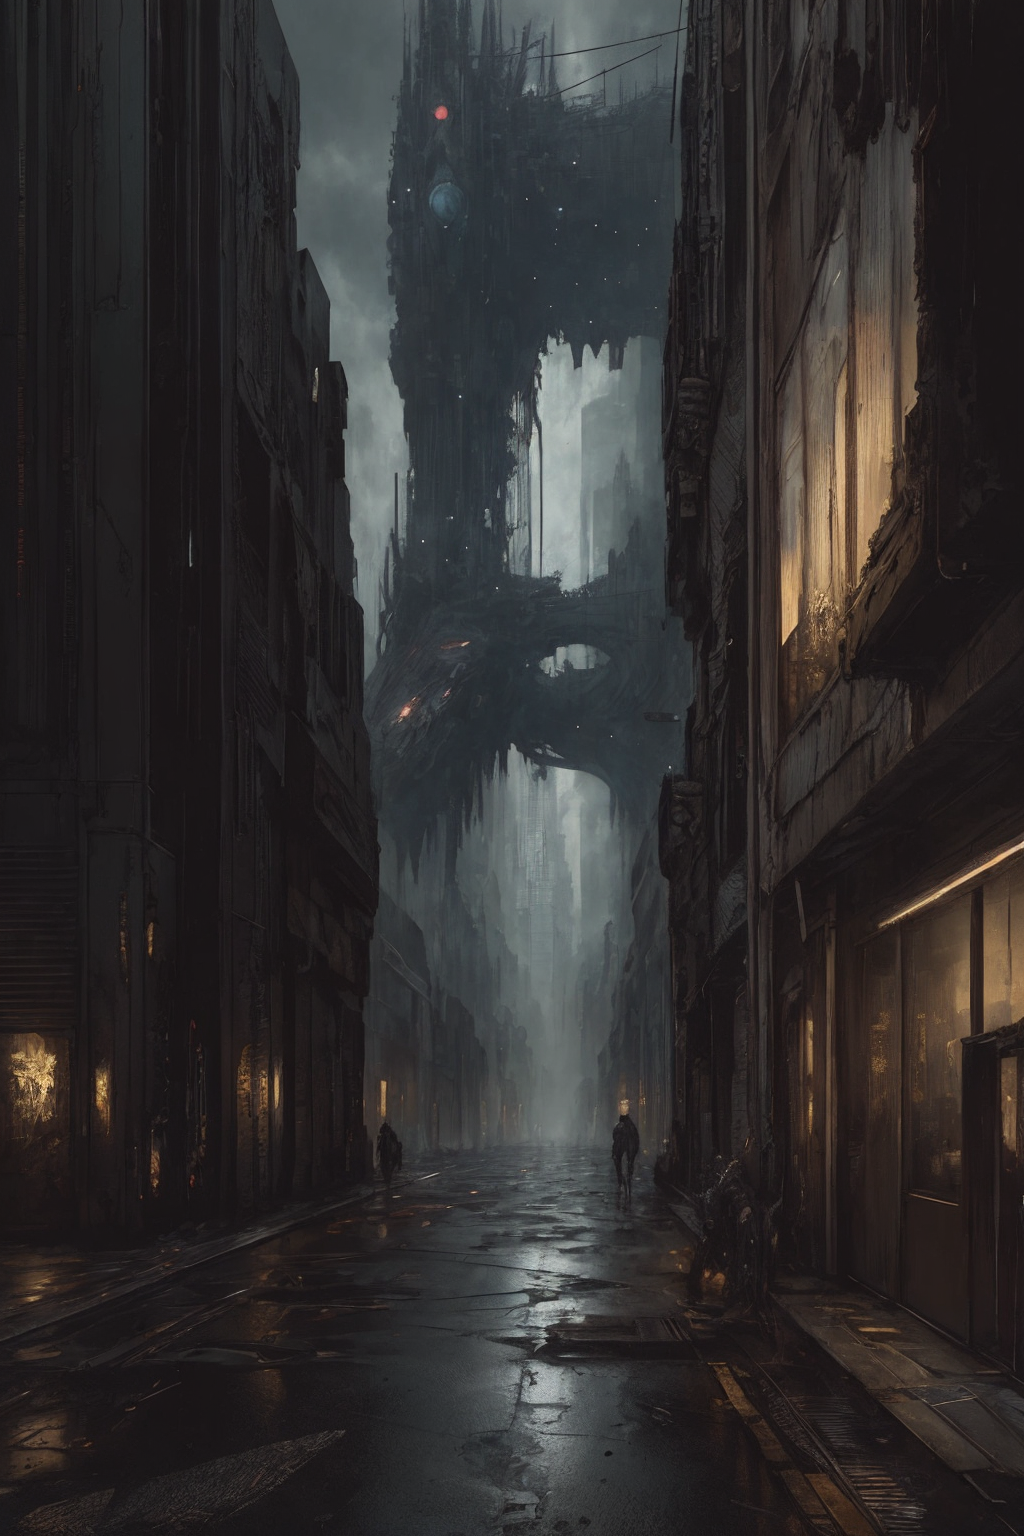 A dark and eerie street with a looming monster and a person walking down the middle.